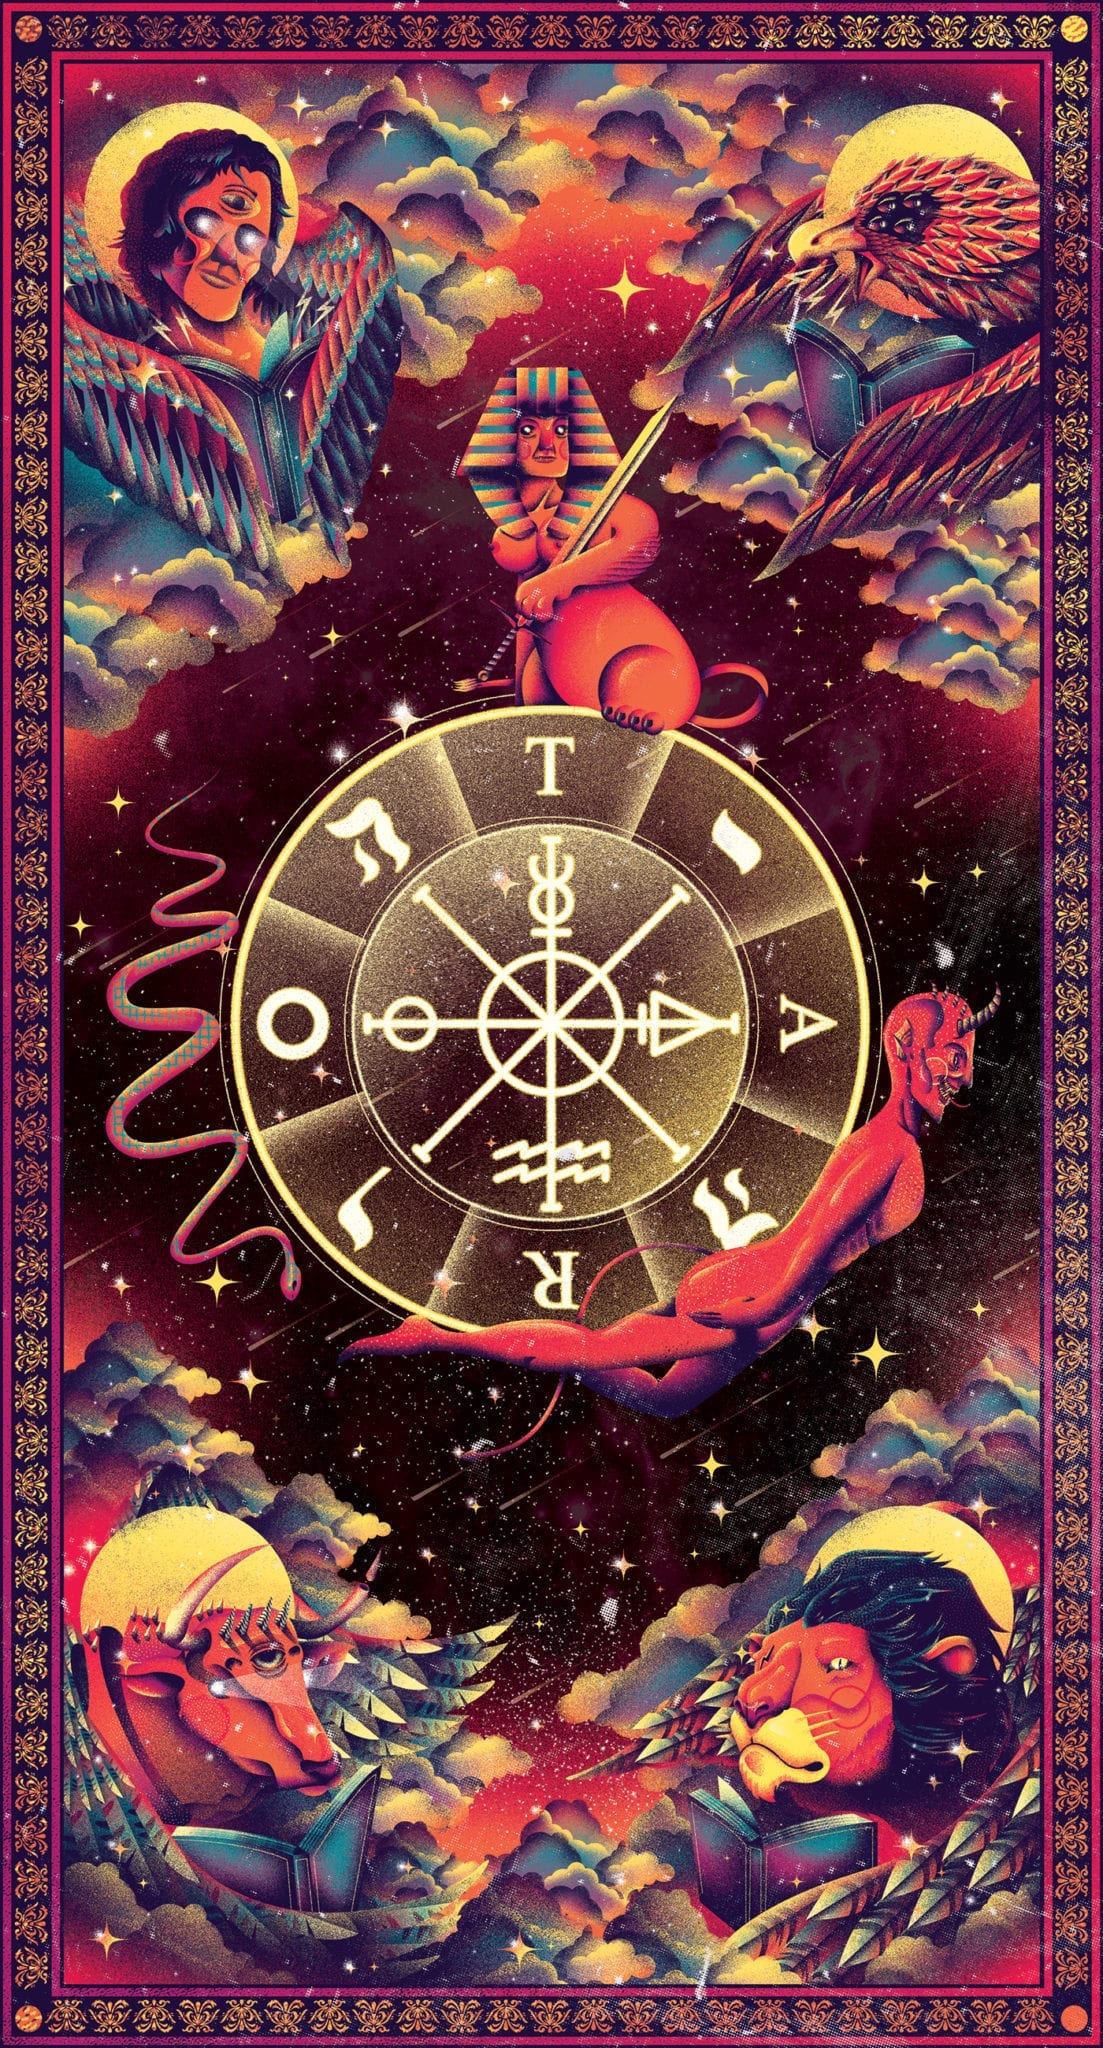 Tarot Card Meanings Wheel Of Fortune